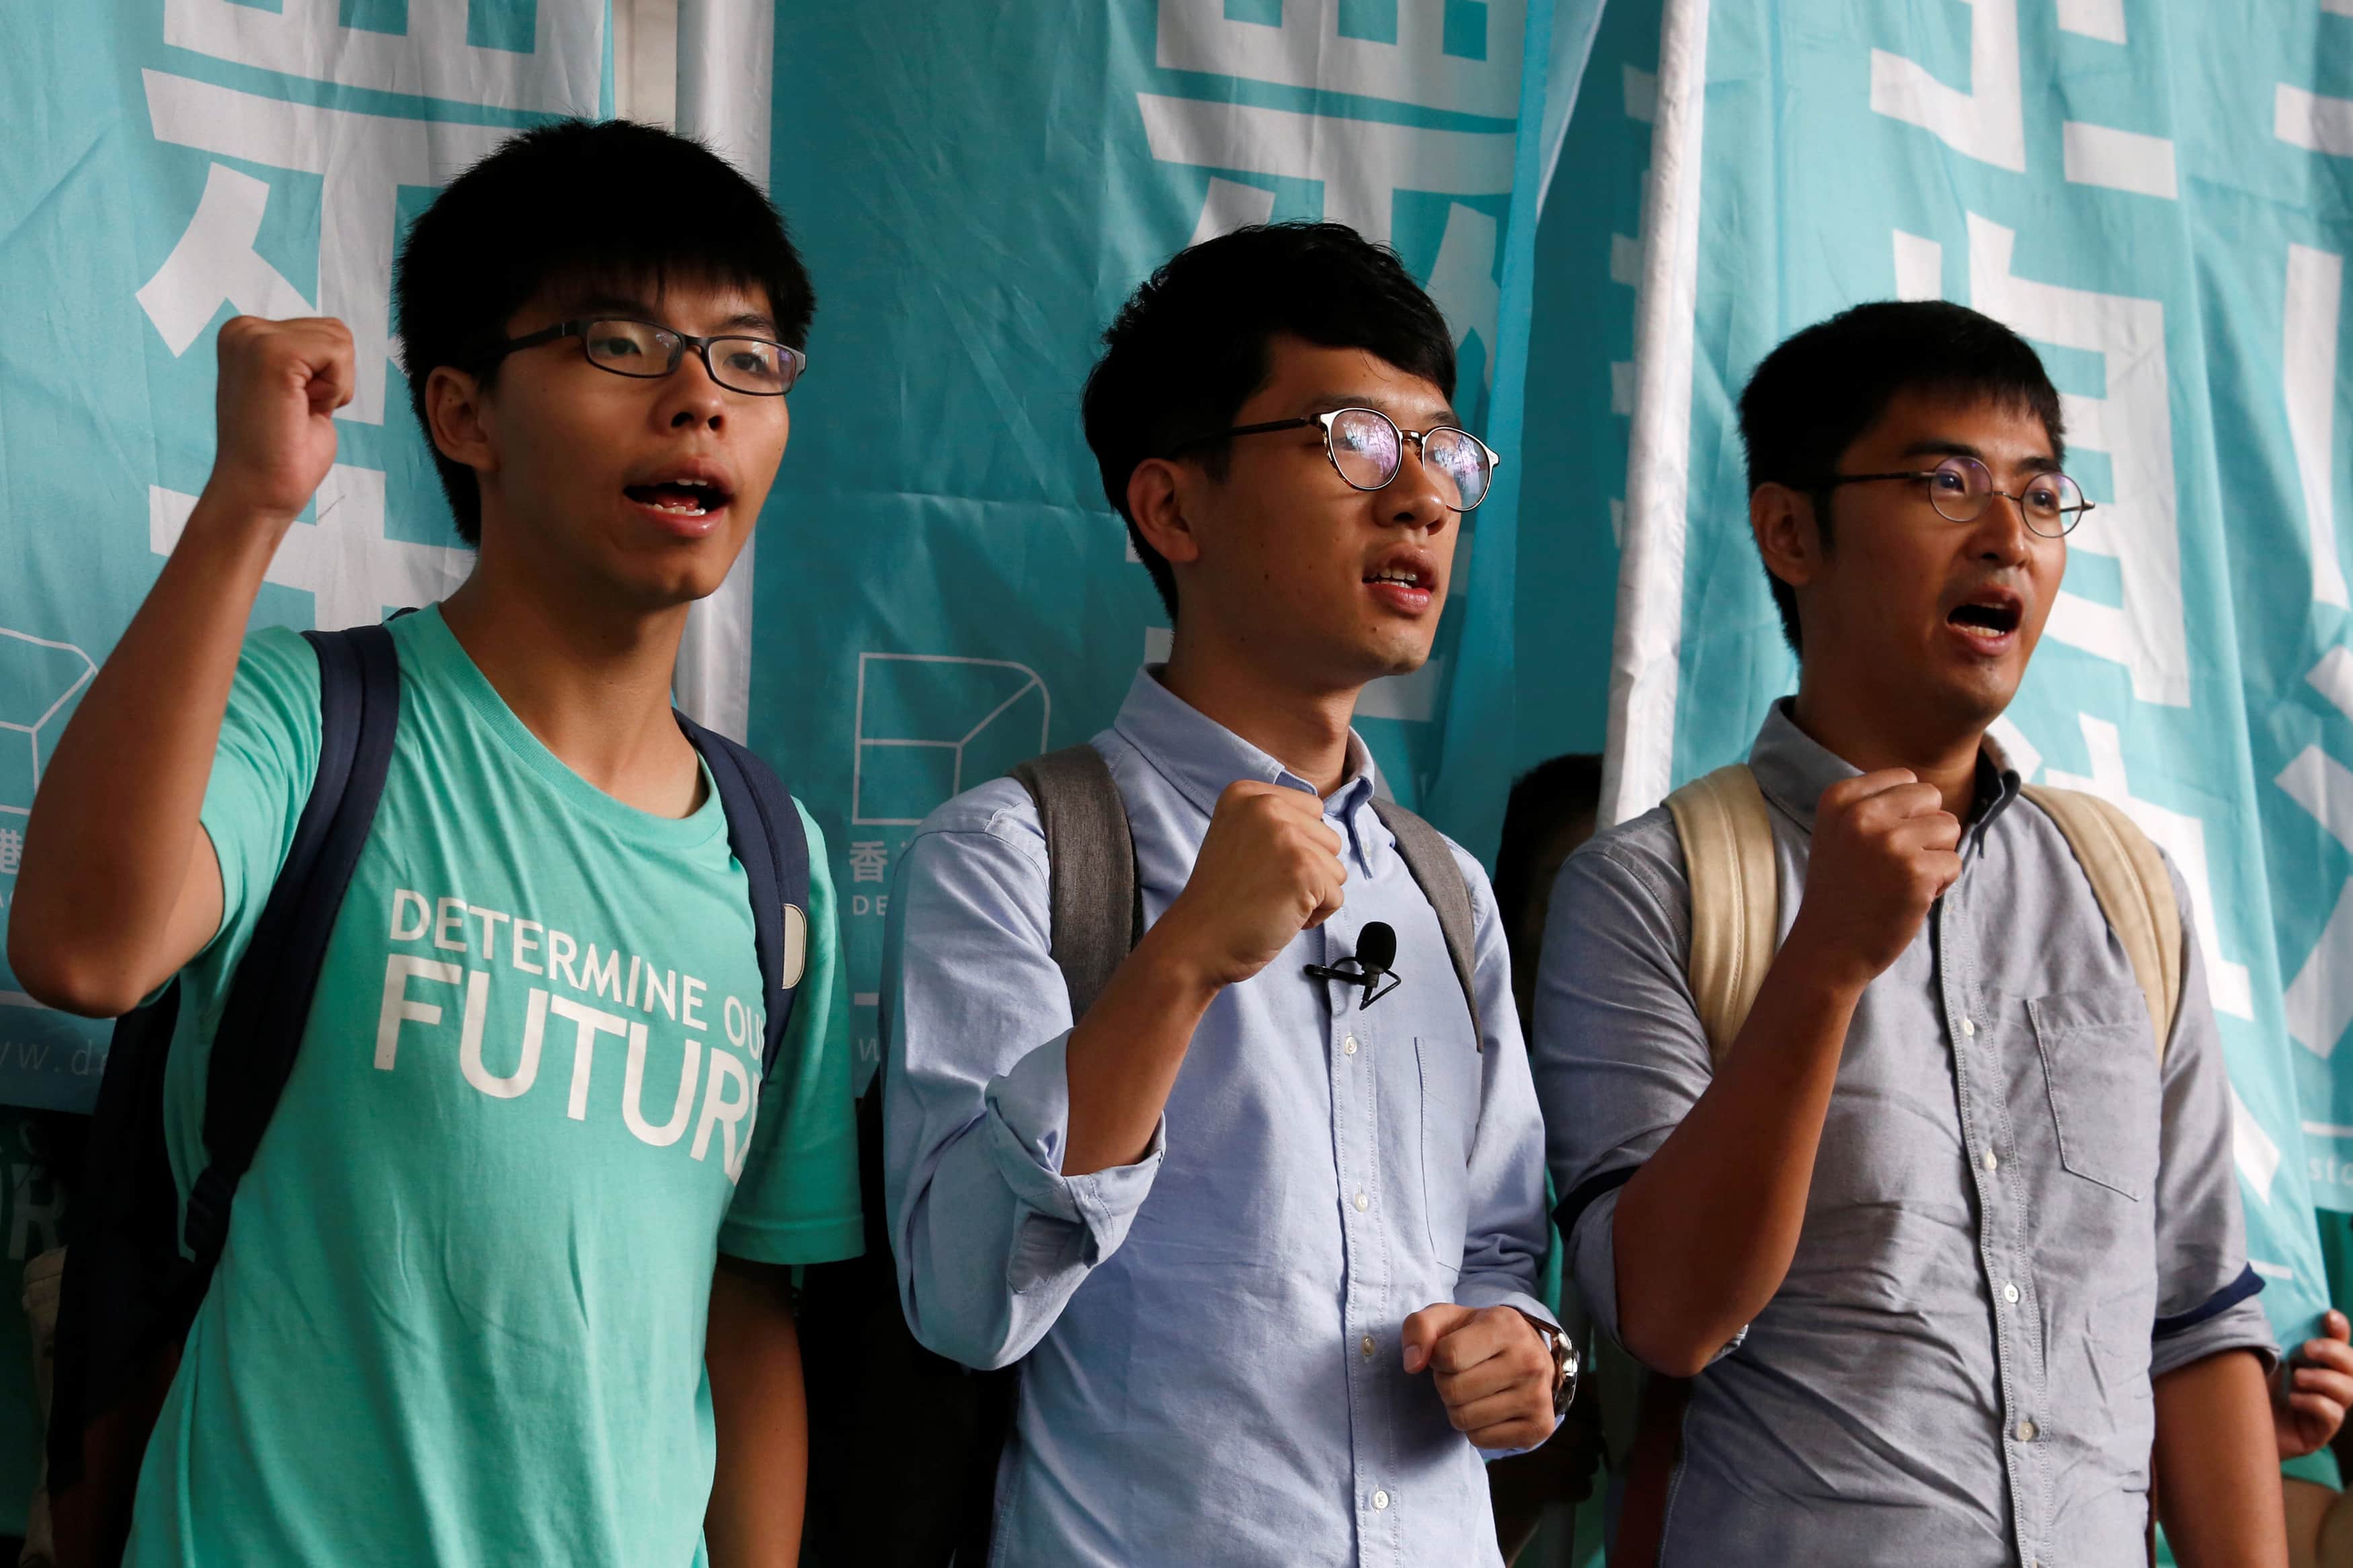 Student leaders Joshua Wong, Nathan Law and Alex Chow chant slogans before a verdict, on charges of inciting and participating in an illegal assembly in 2014, REUTERS/Bobby Yip